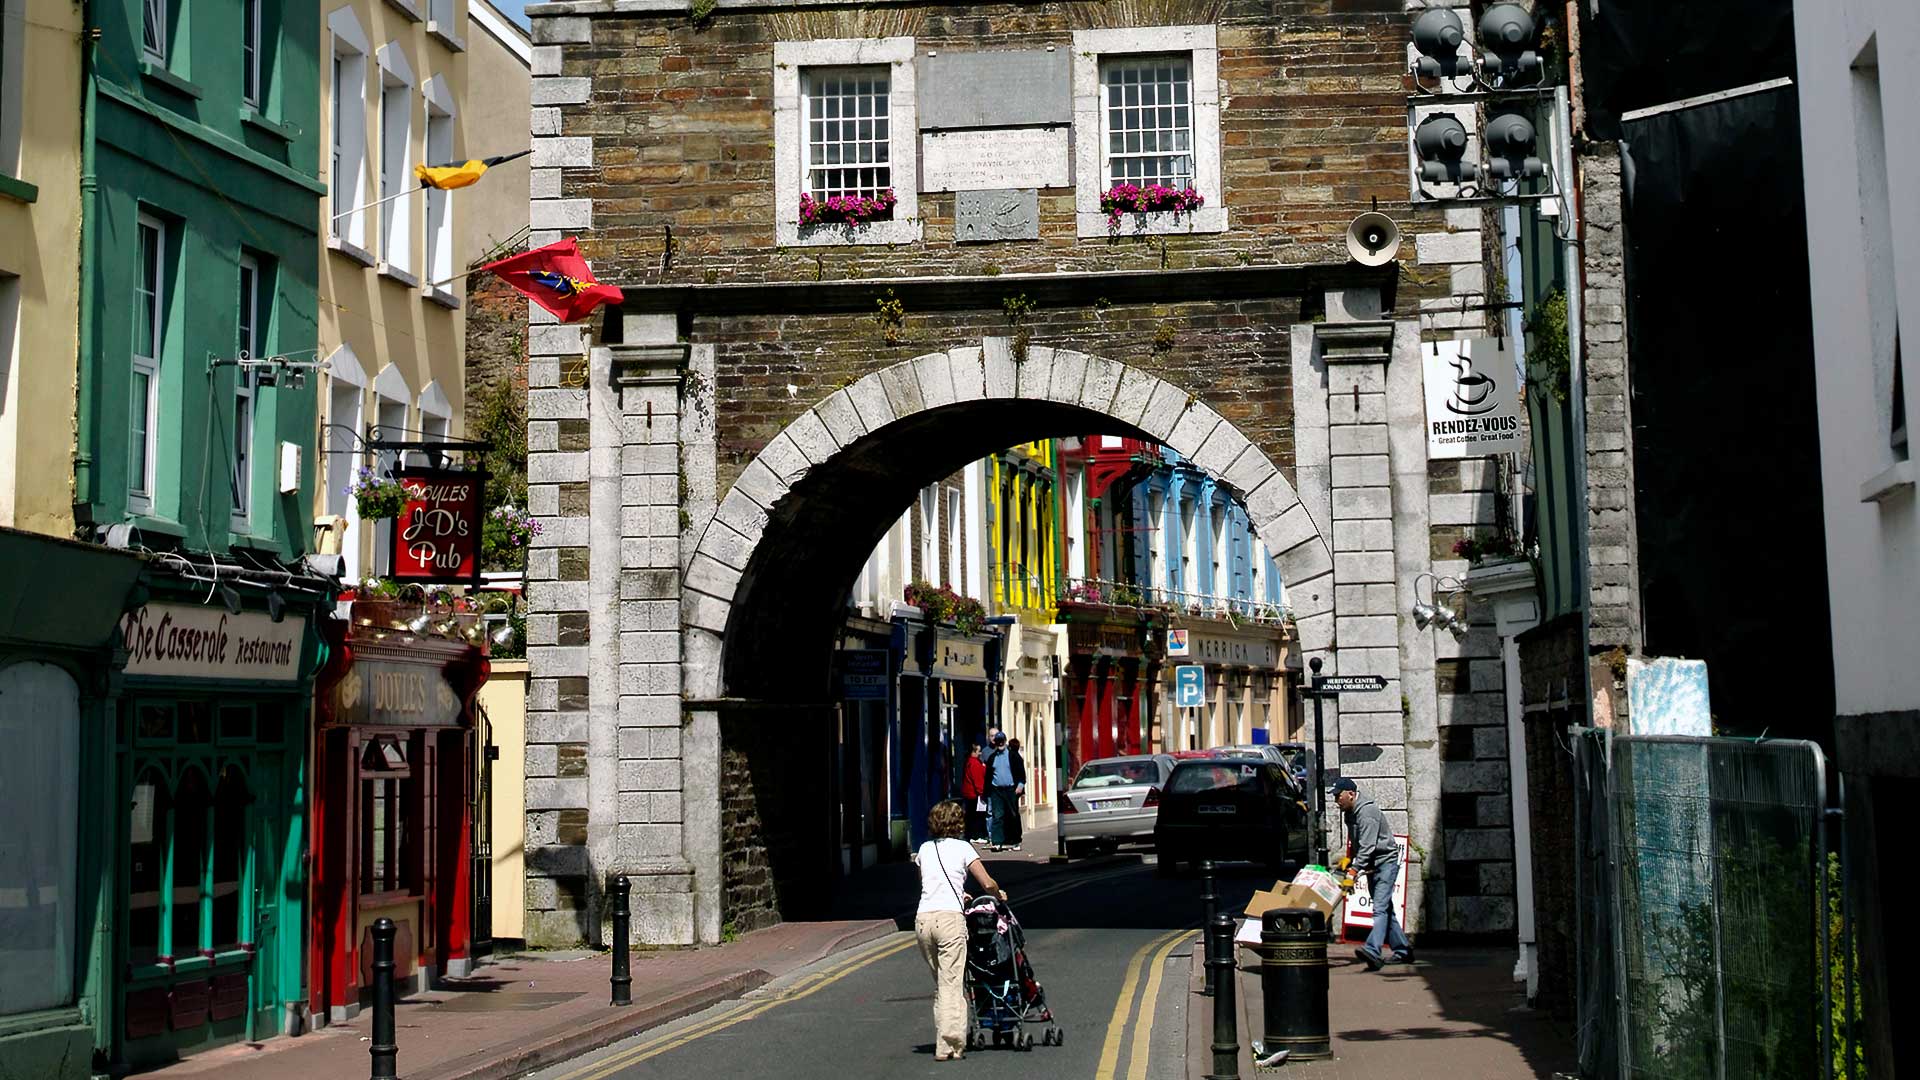 Youghal town in Ireland's Ancient East